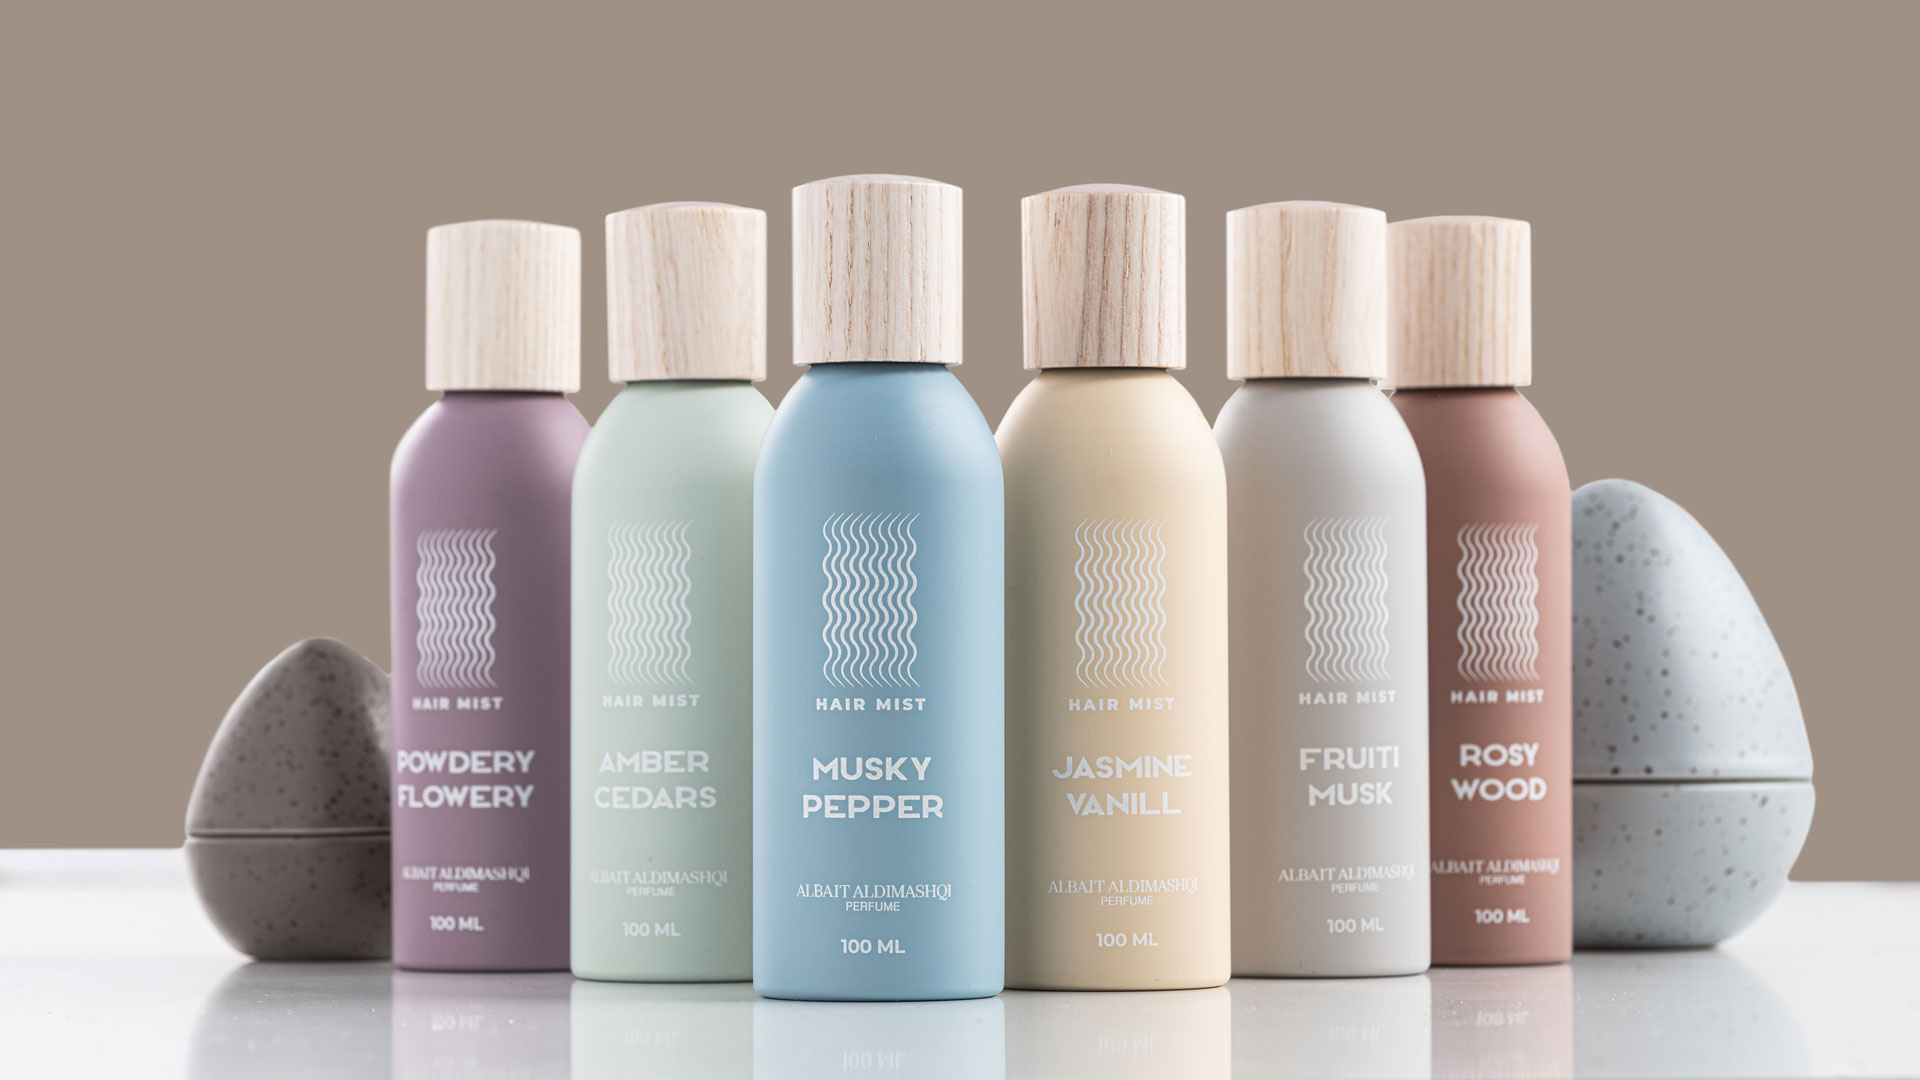 Shop for the Perfect Women's Hair Mist for Your Style